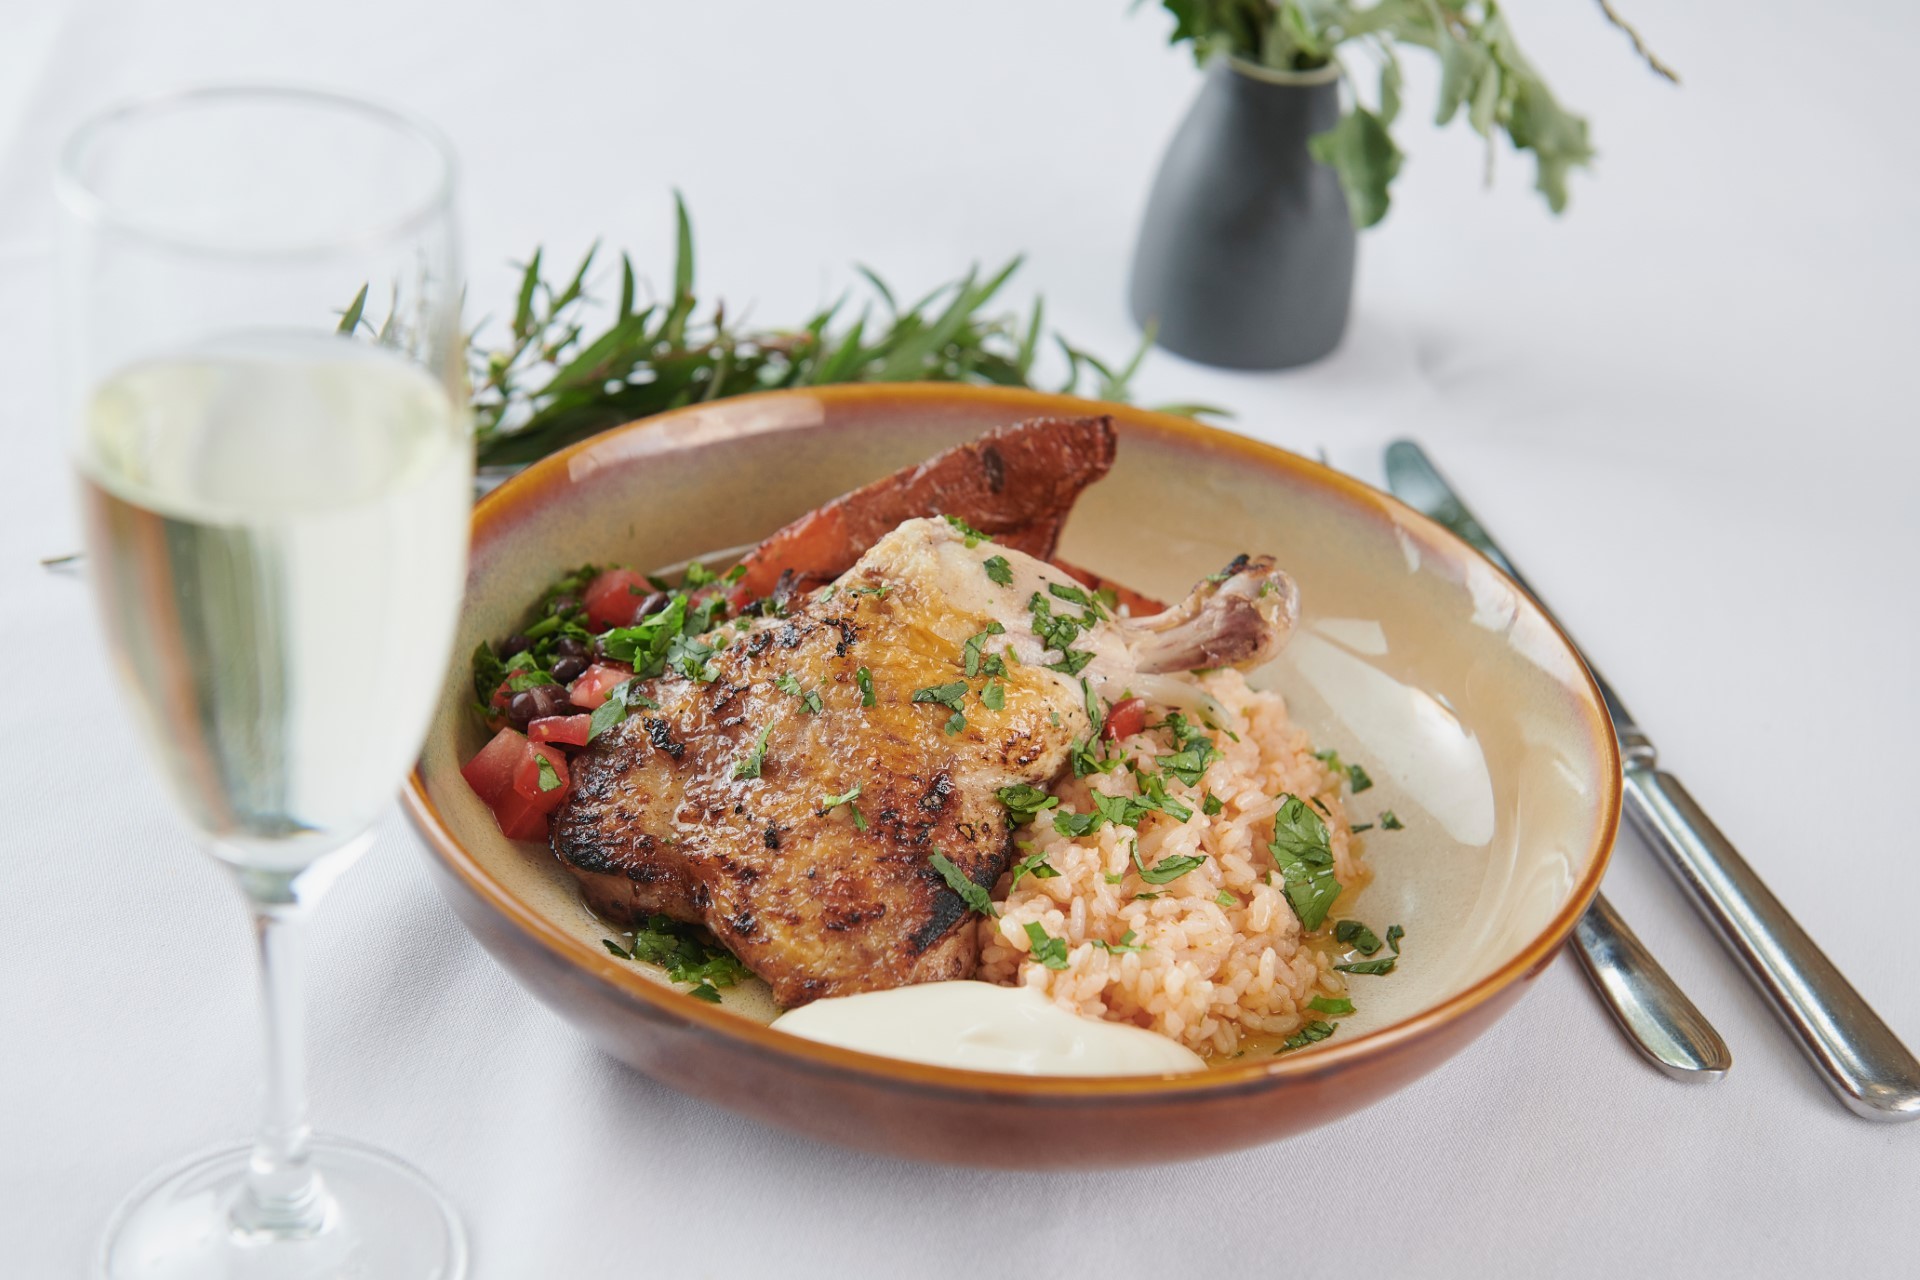 A marinated chicken dish with a glass of wine